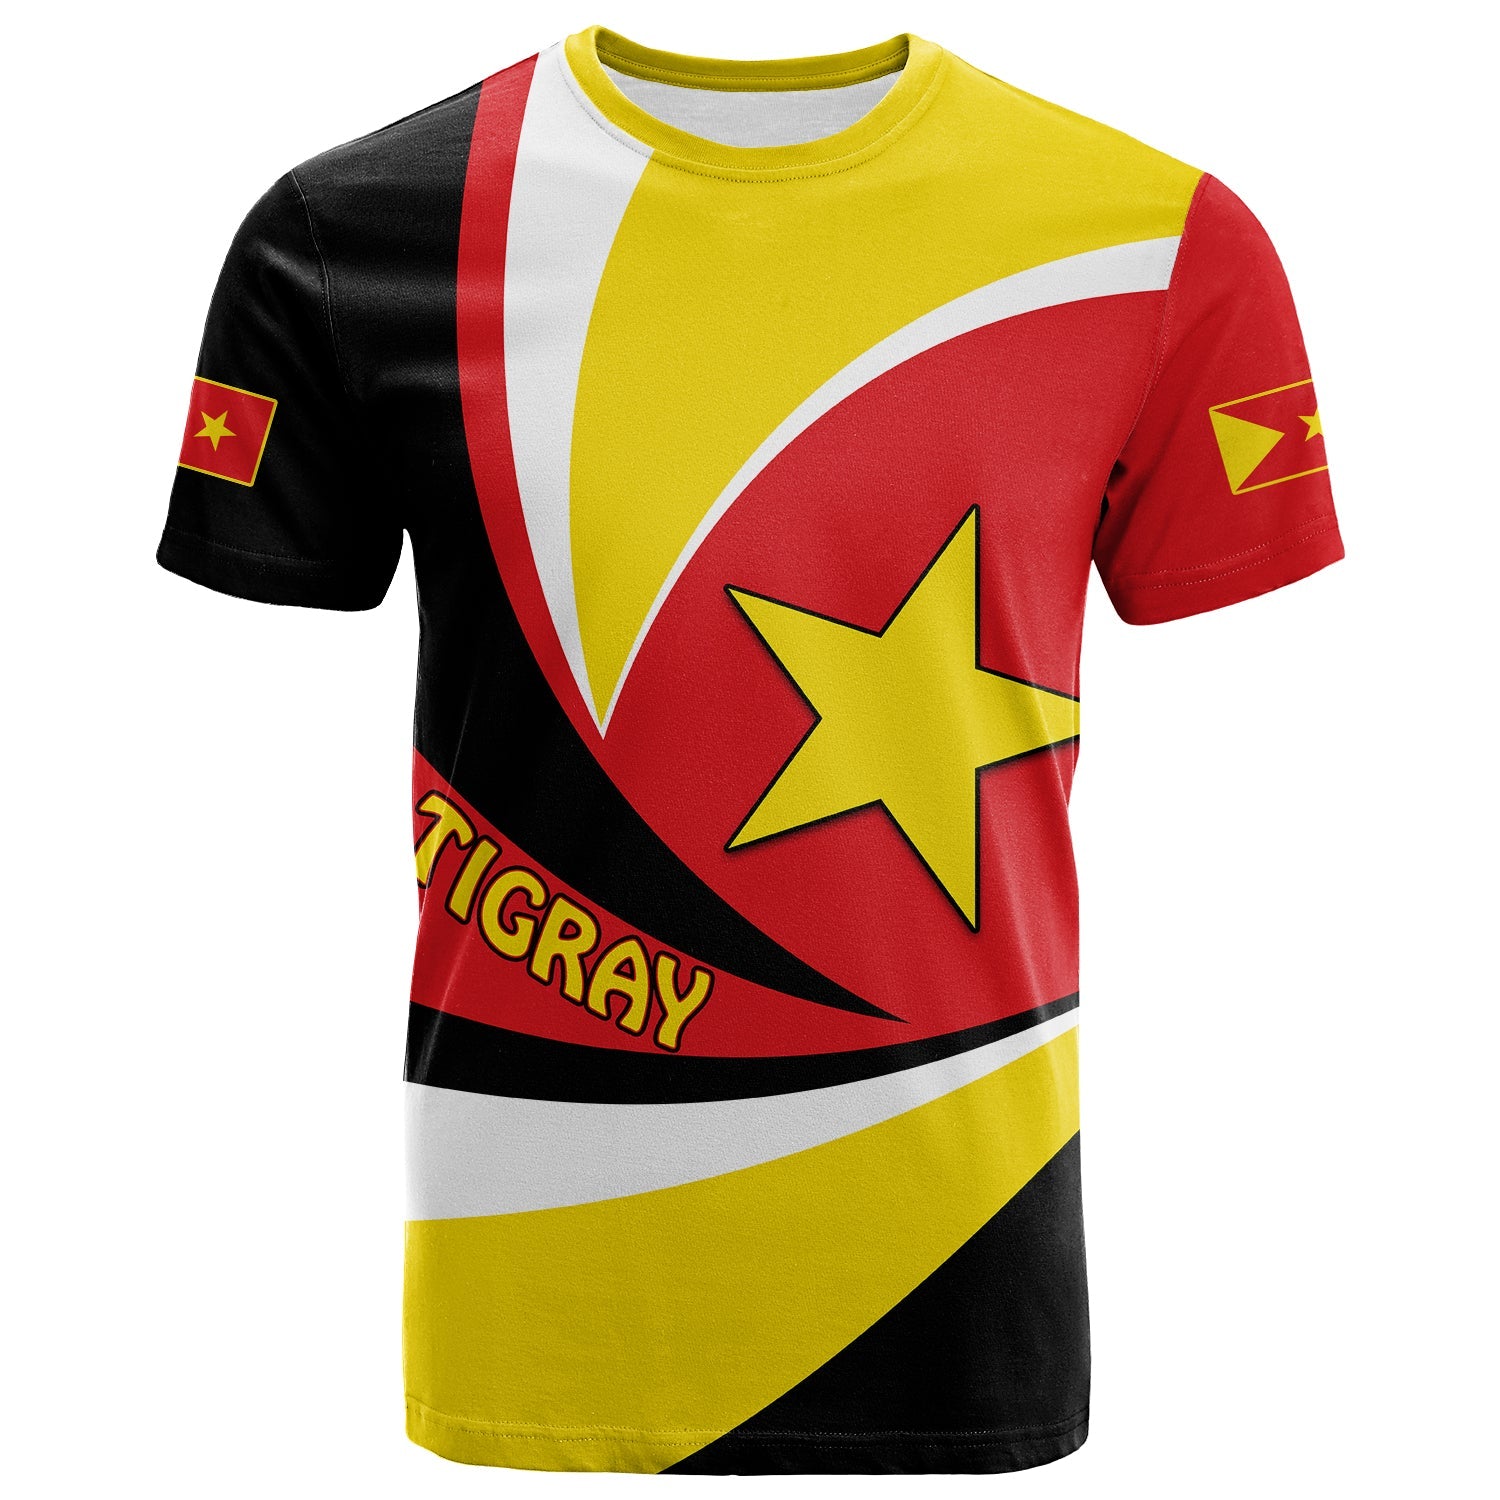 tigray-t-shirt-style-color-flag